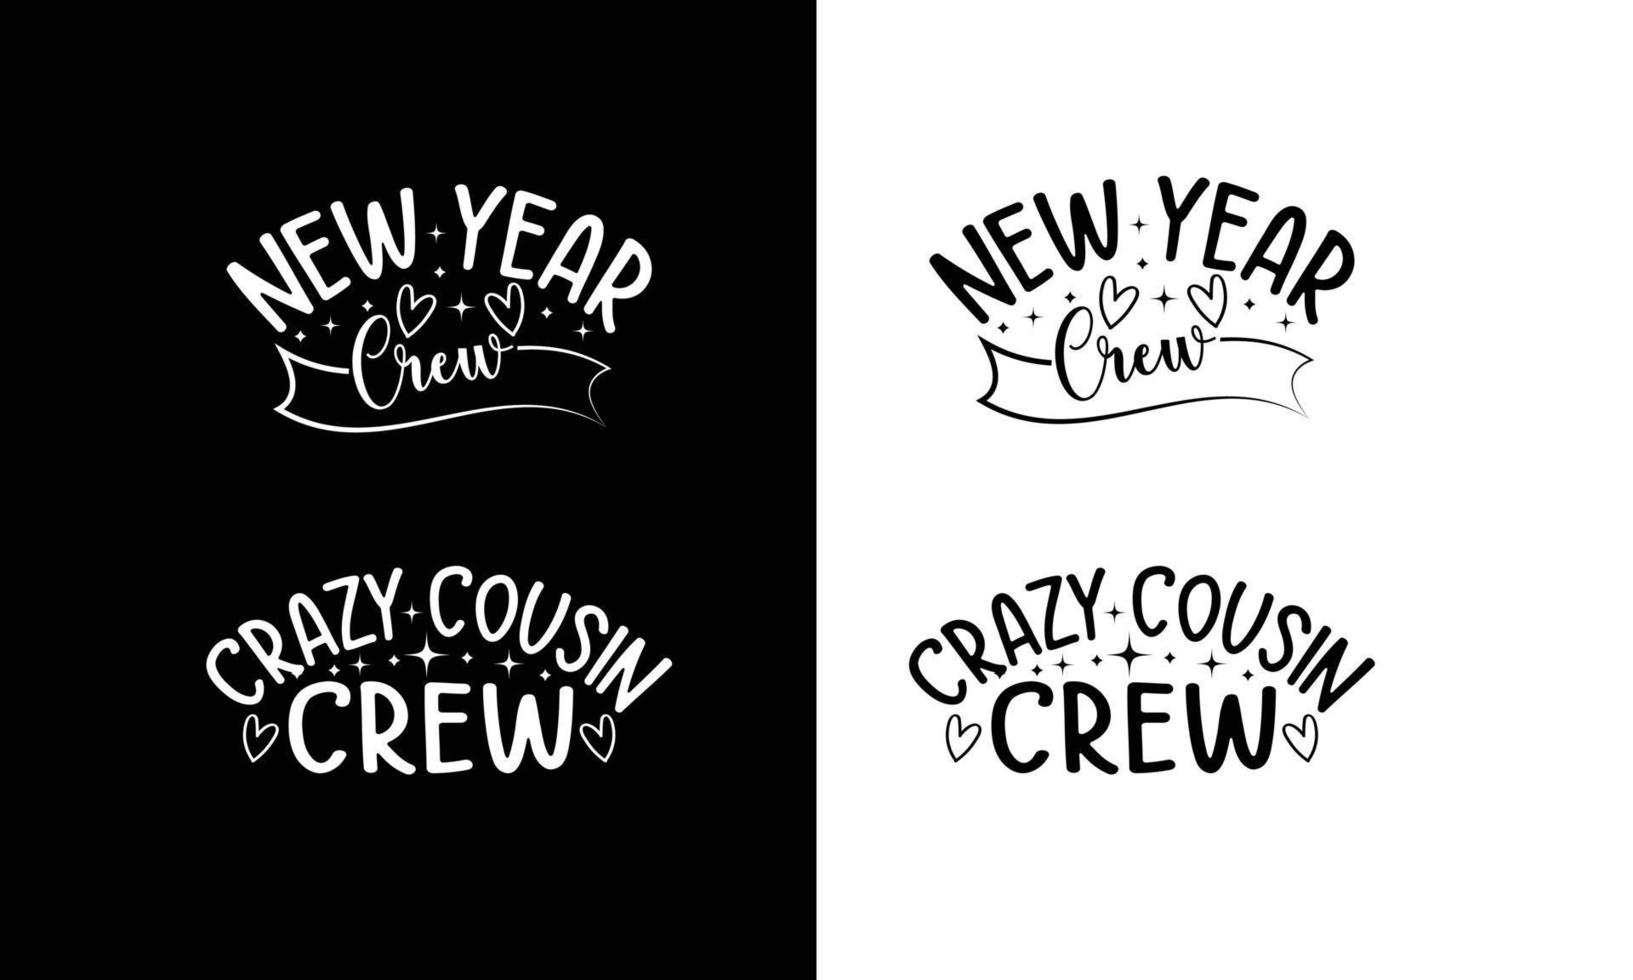 Crazy Cousin Crew and New year Crew Christmas gift. vector